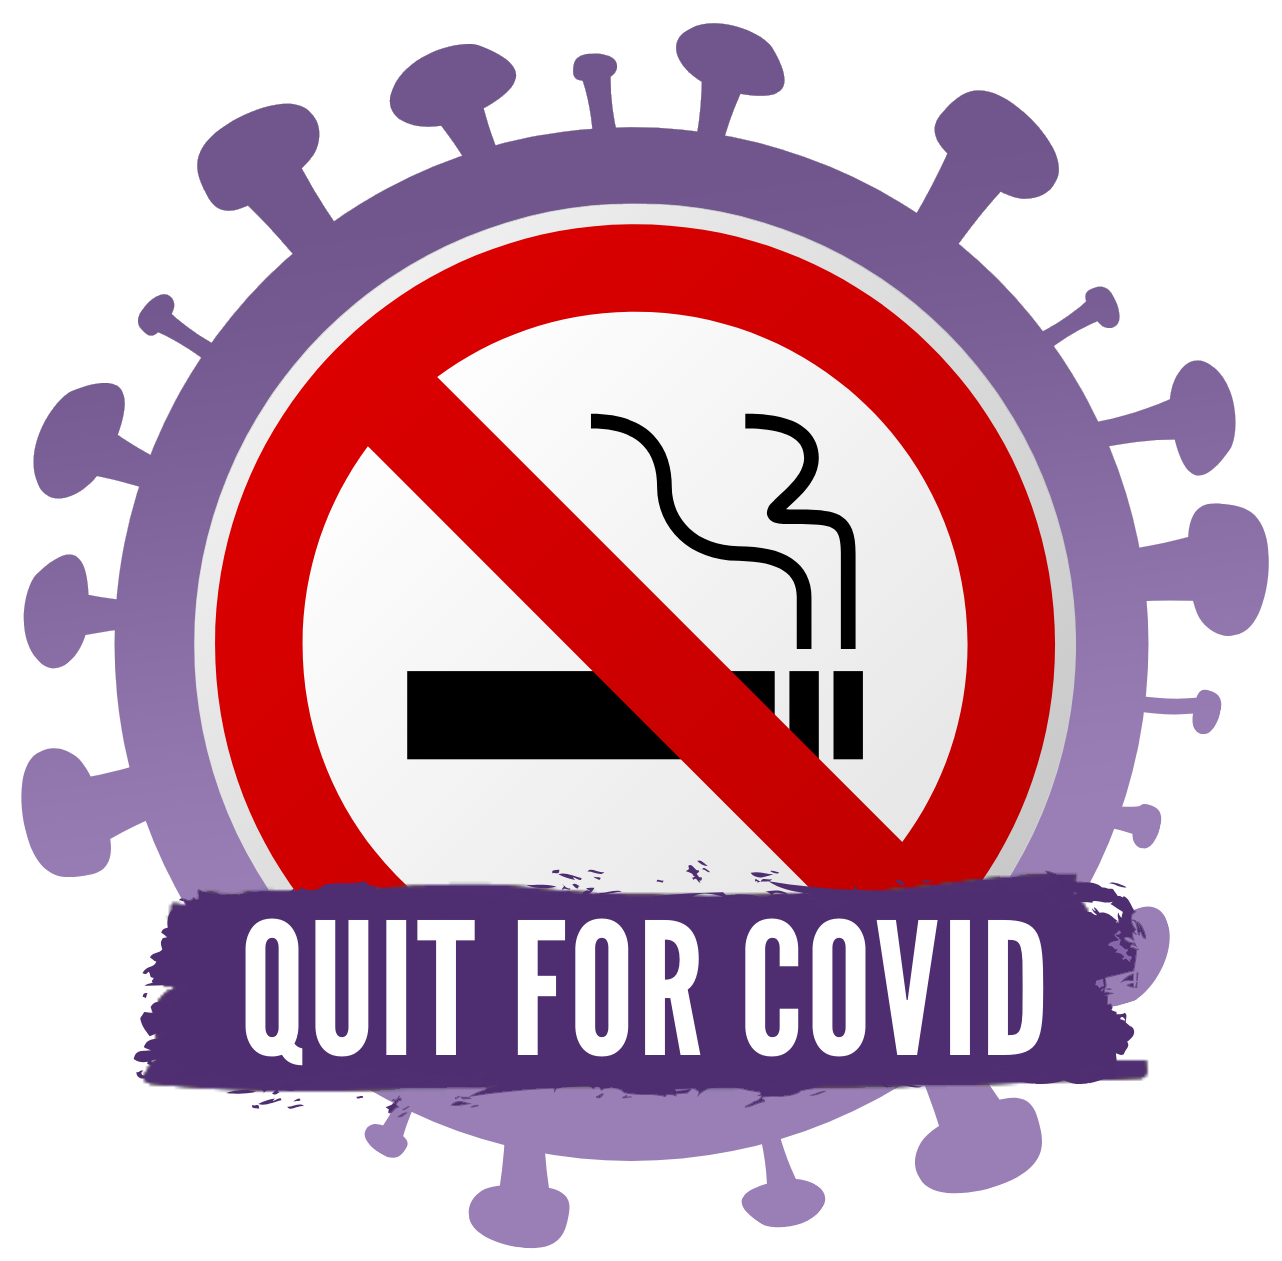 Quit for Covid logo: showing a cigarette crossed out inside bacteria